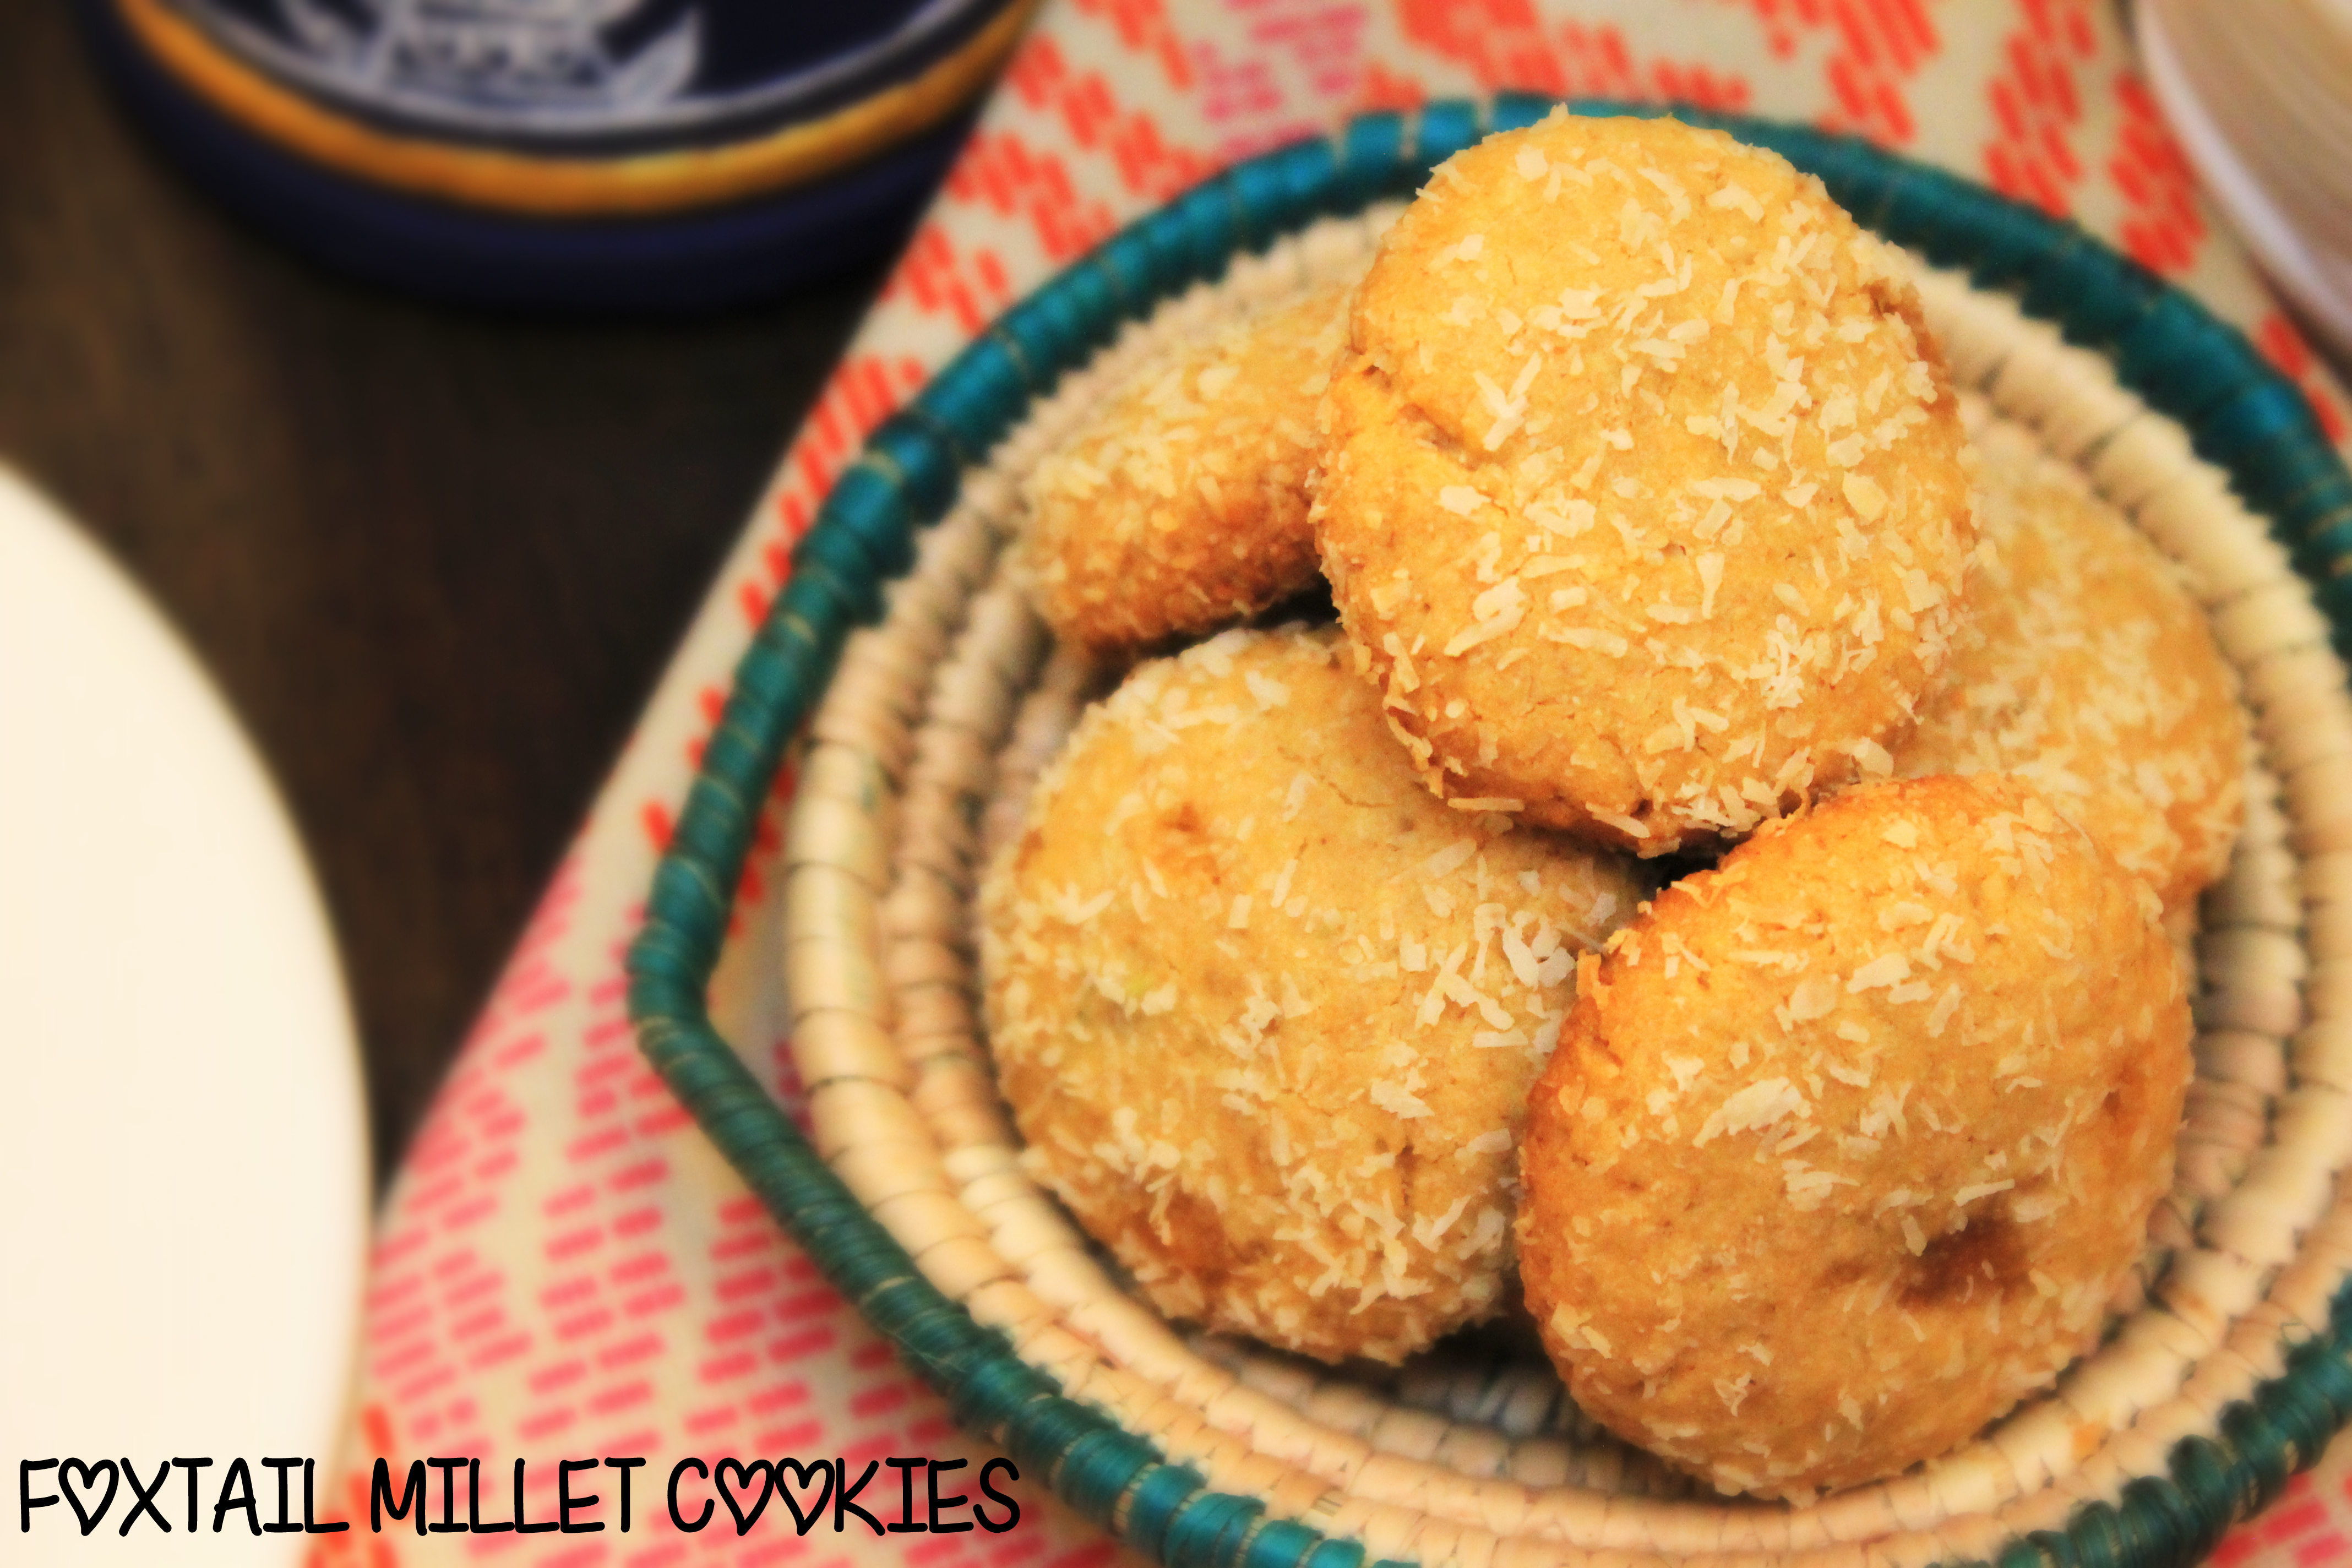 FOXTAIL MILLET COOKIES RECIPE THINAI BISCUITS